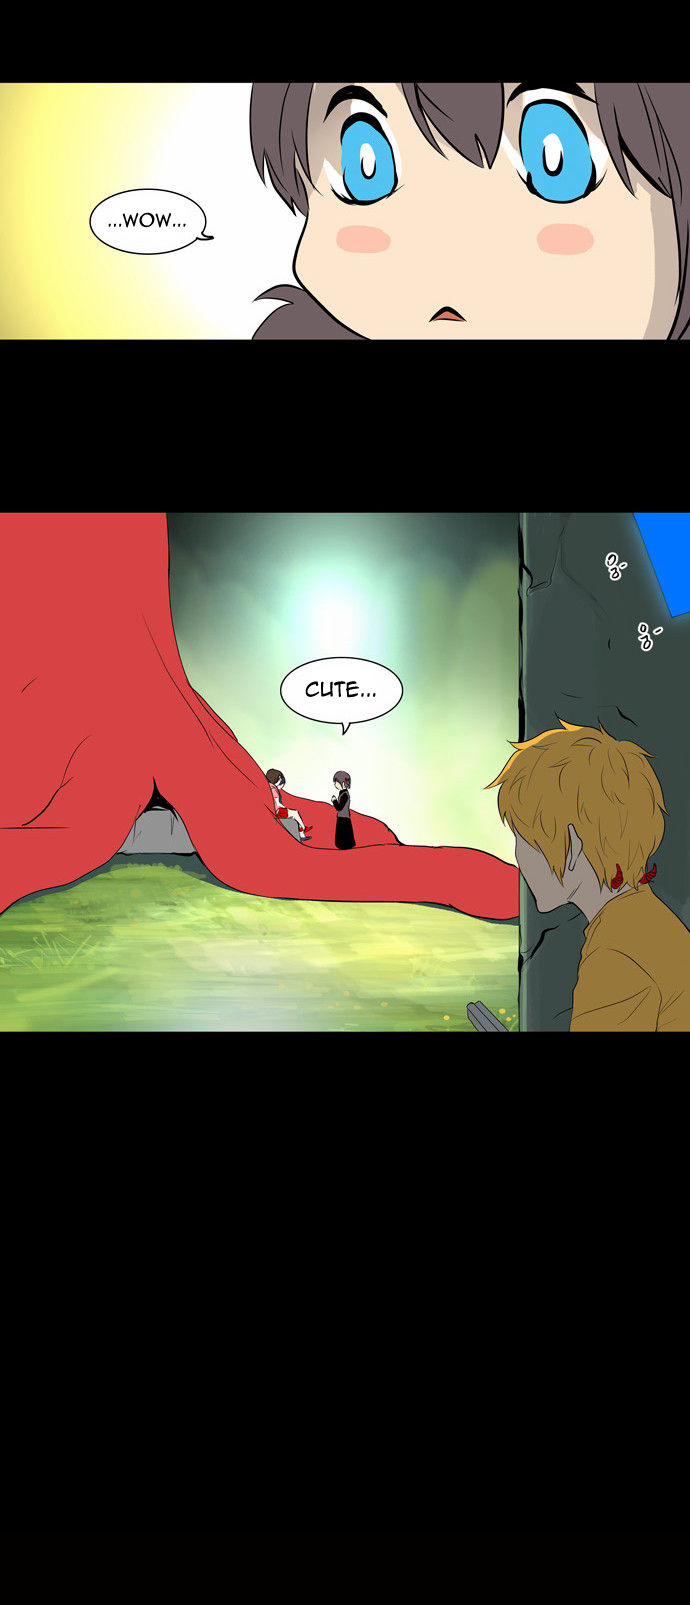 Tower of God 142